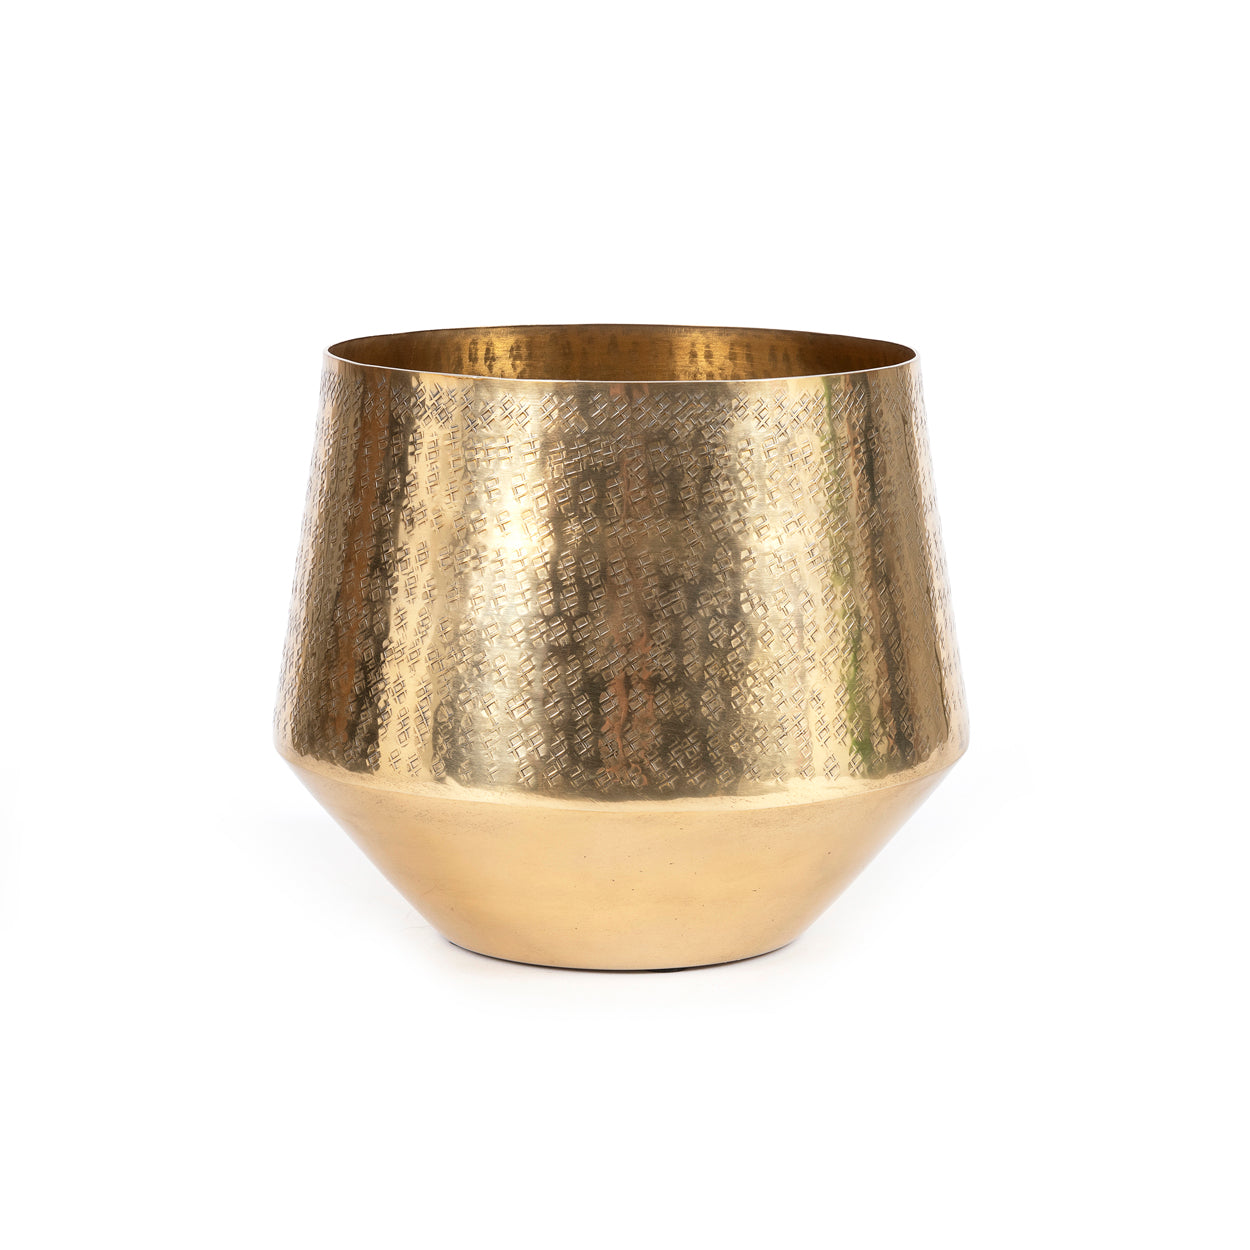 THE HAMMERED Planter one piece